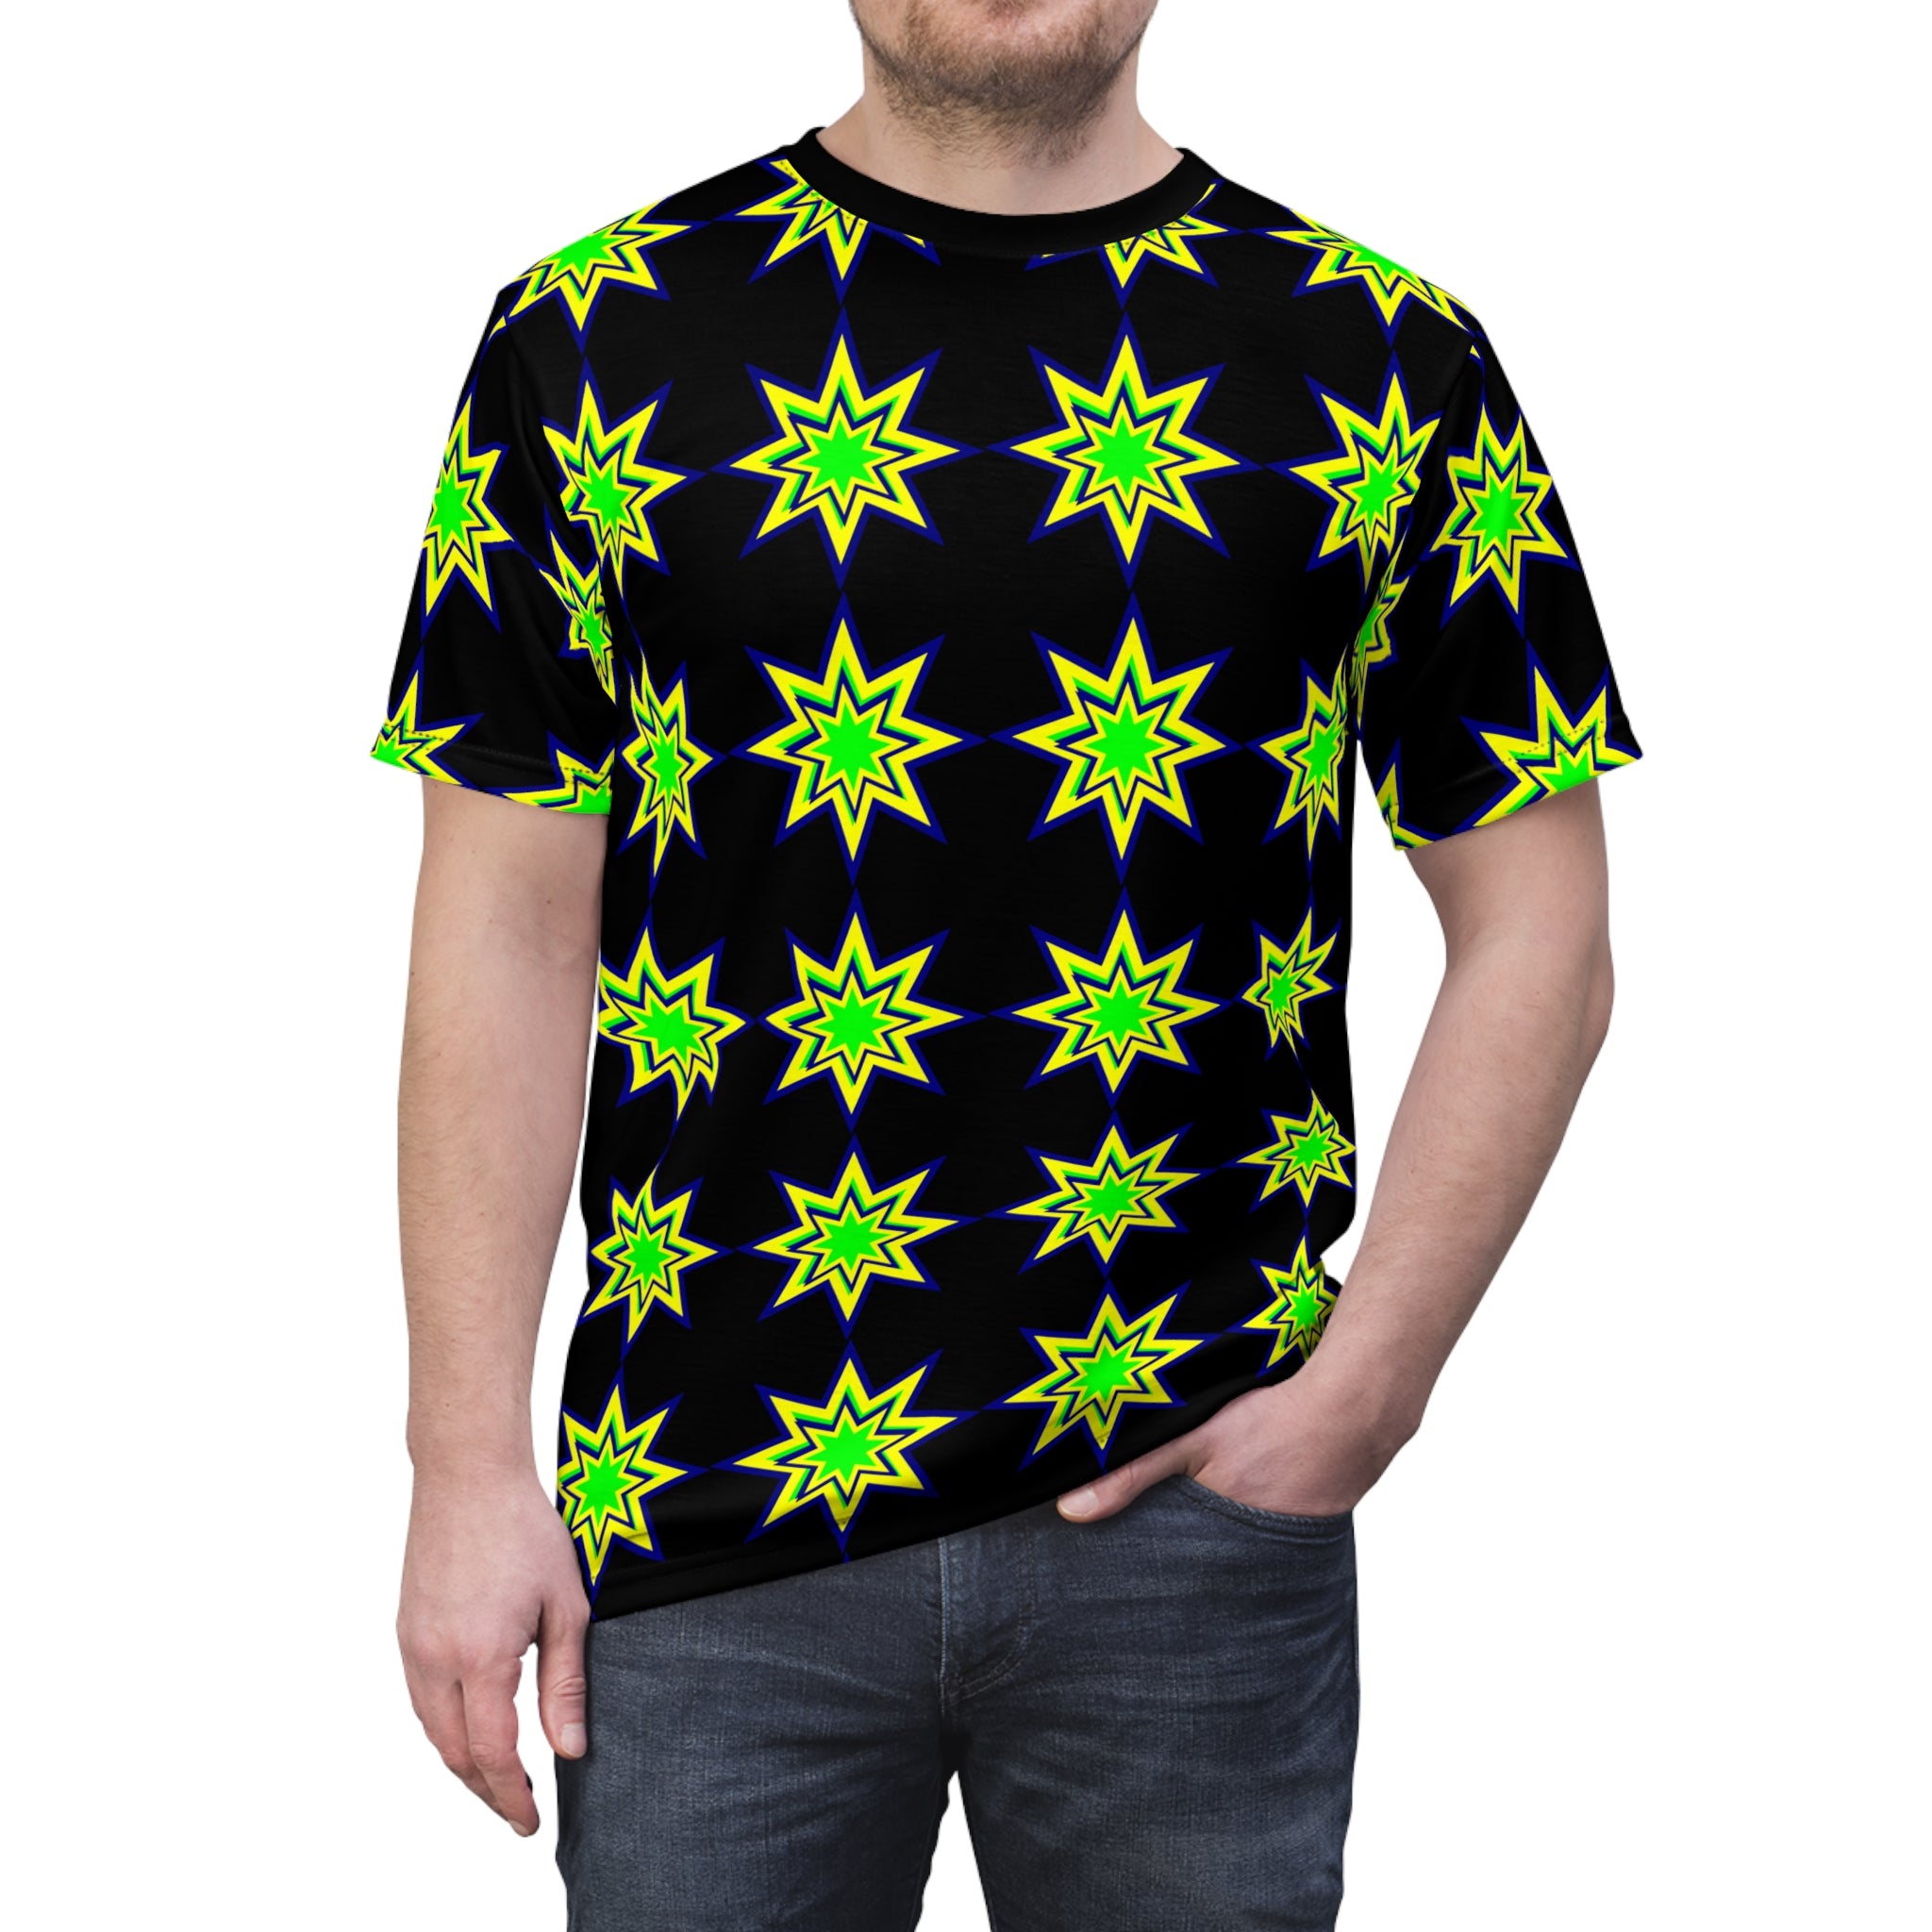 St. Vincent and the Grenadines national color stars on a black t-shirt